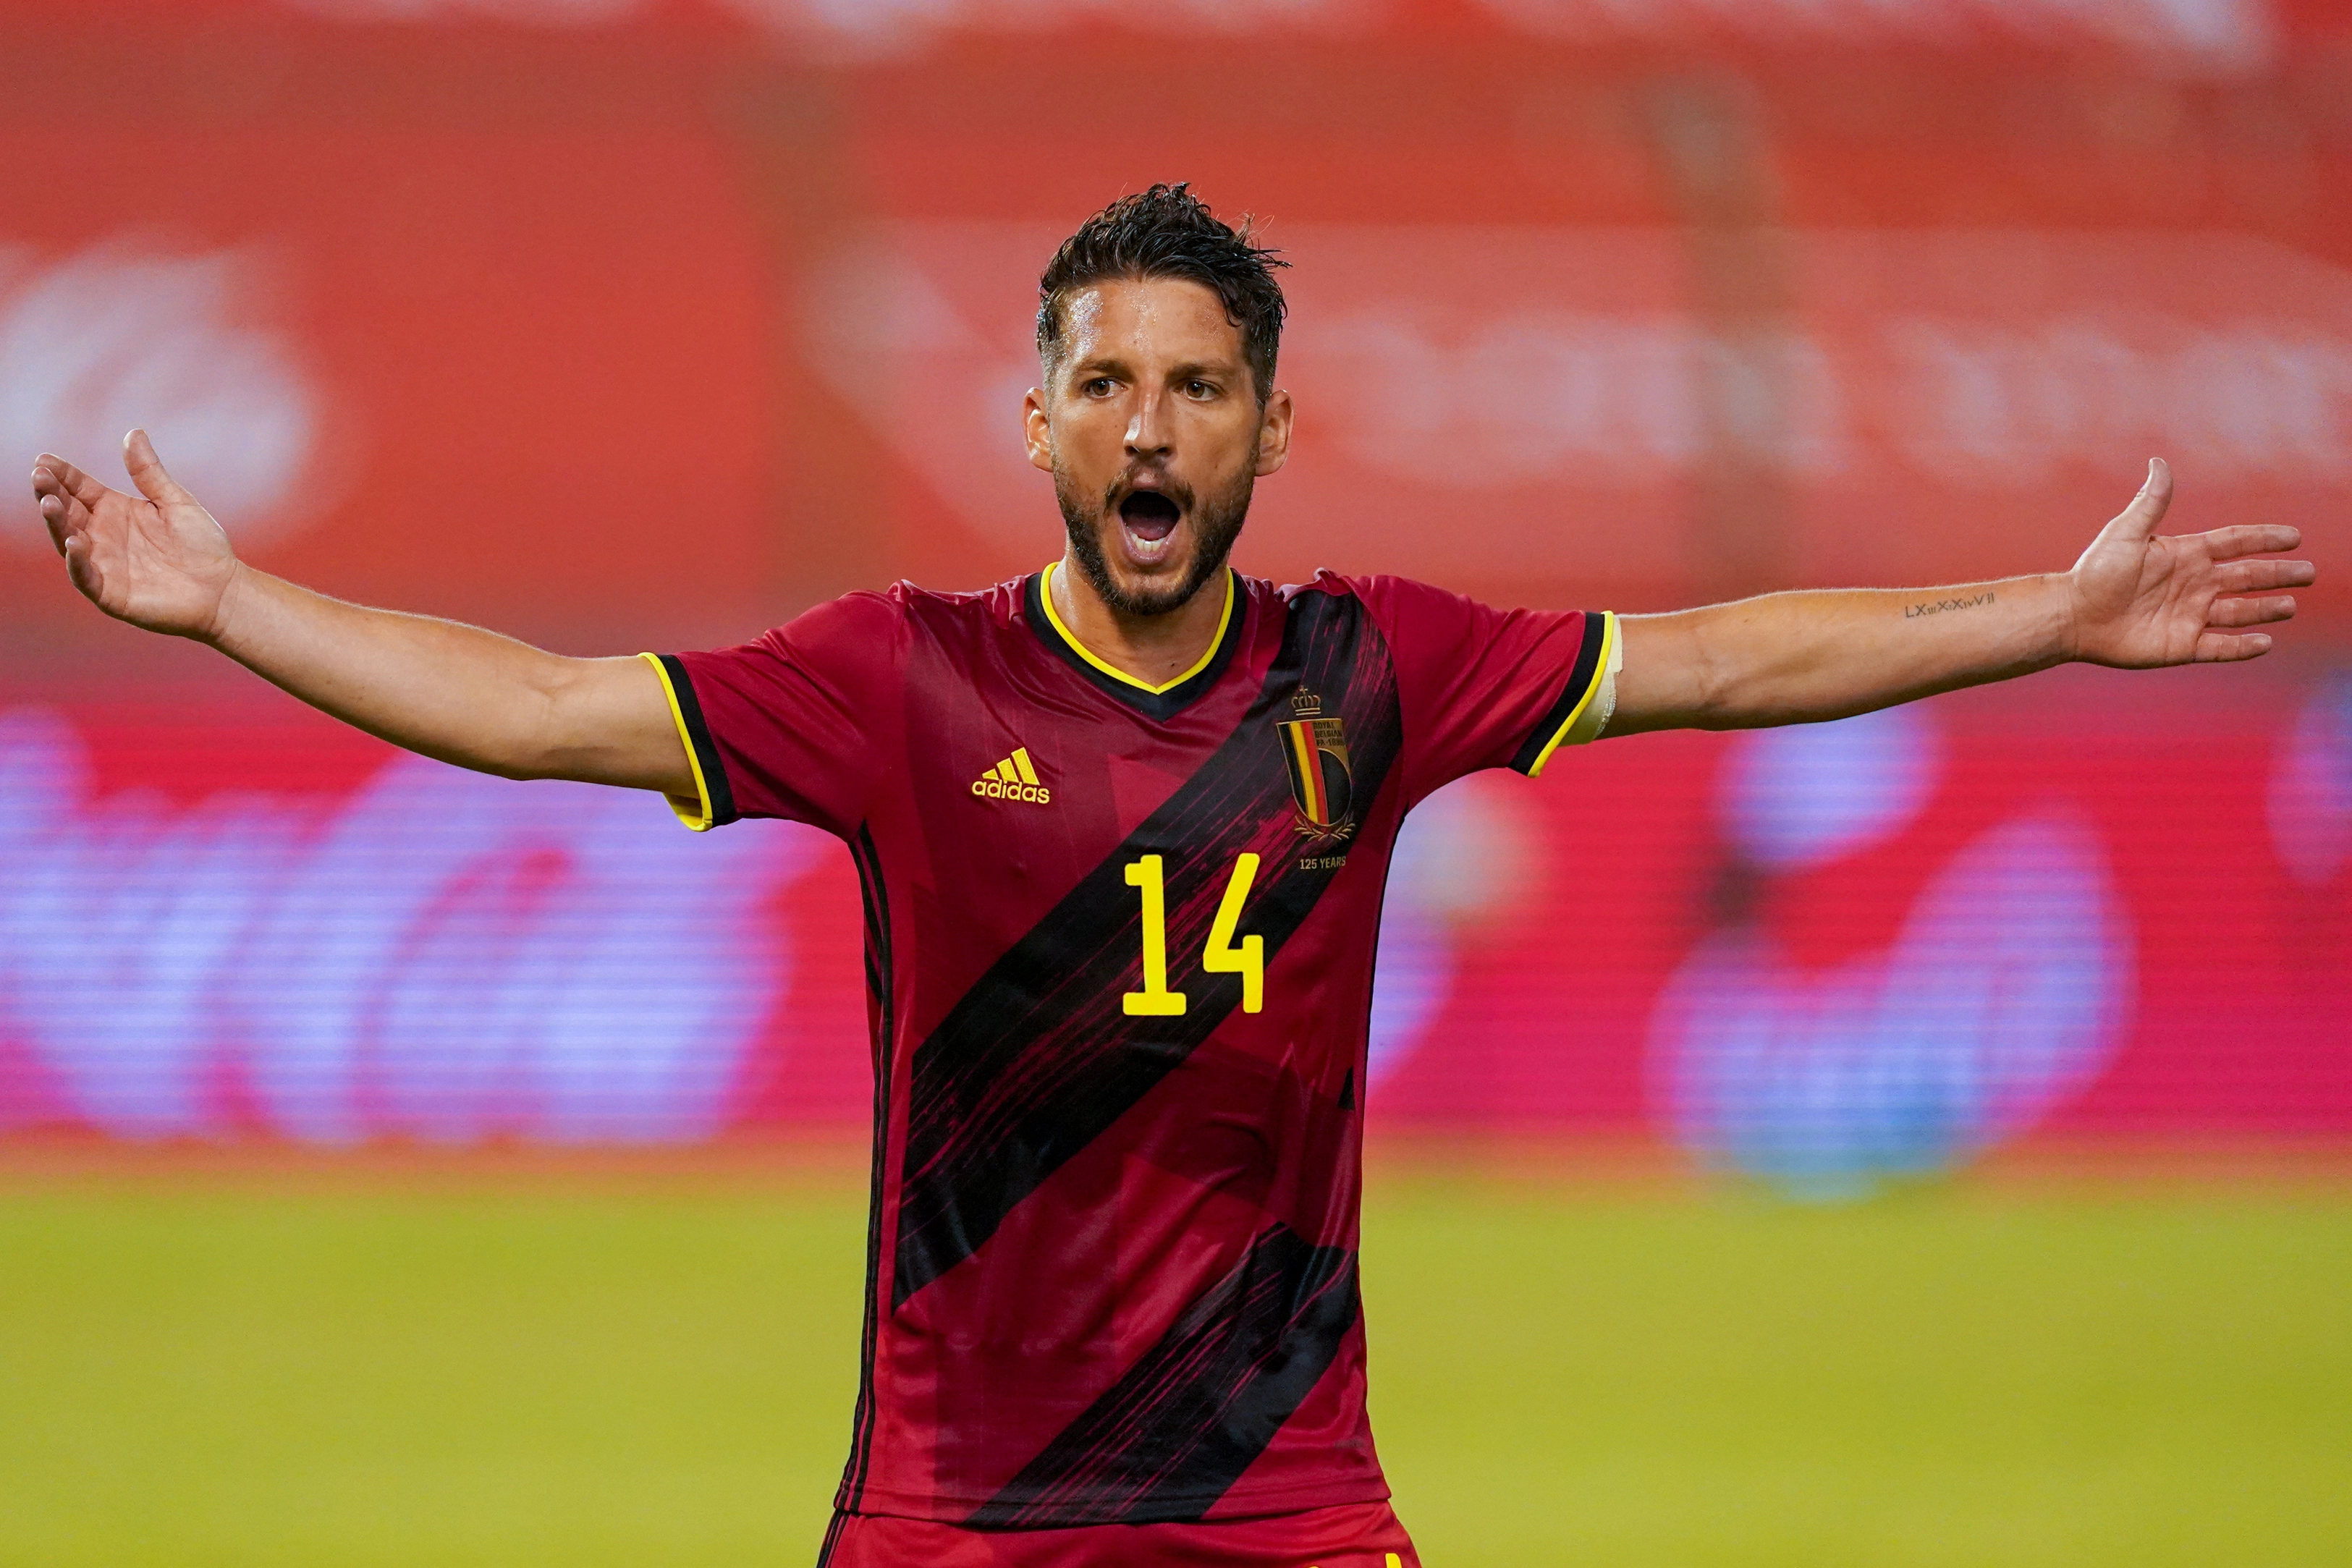 Dries Mertens joined Galatasaray after a long saga regarding his contract renewal with Napoli, with Juventus also making an offer.